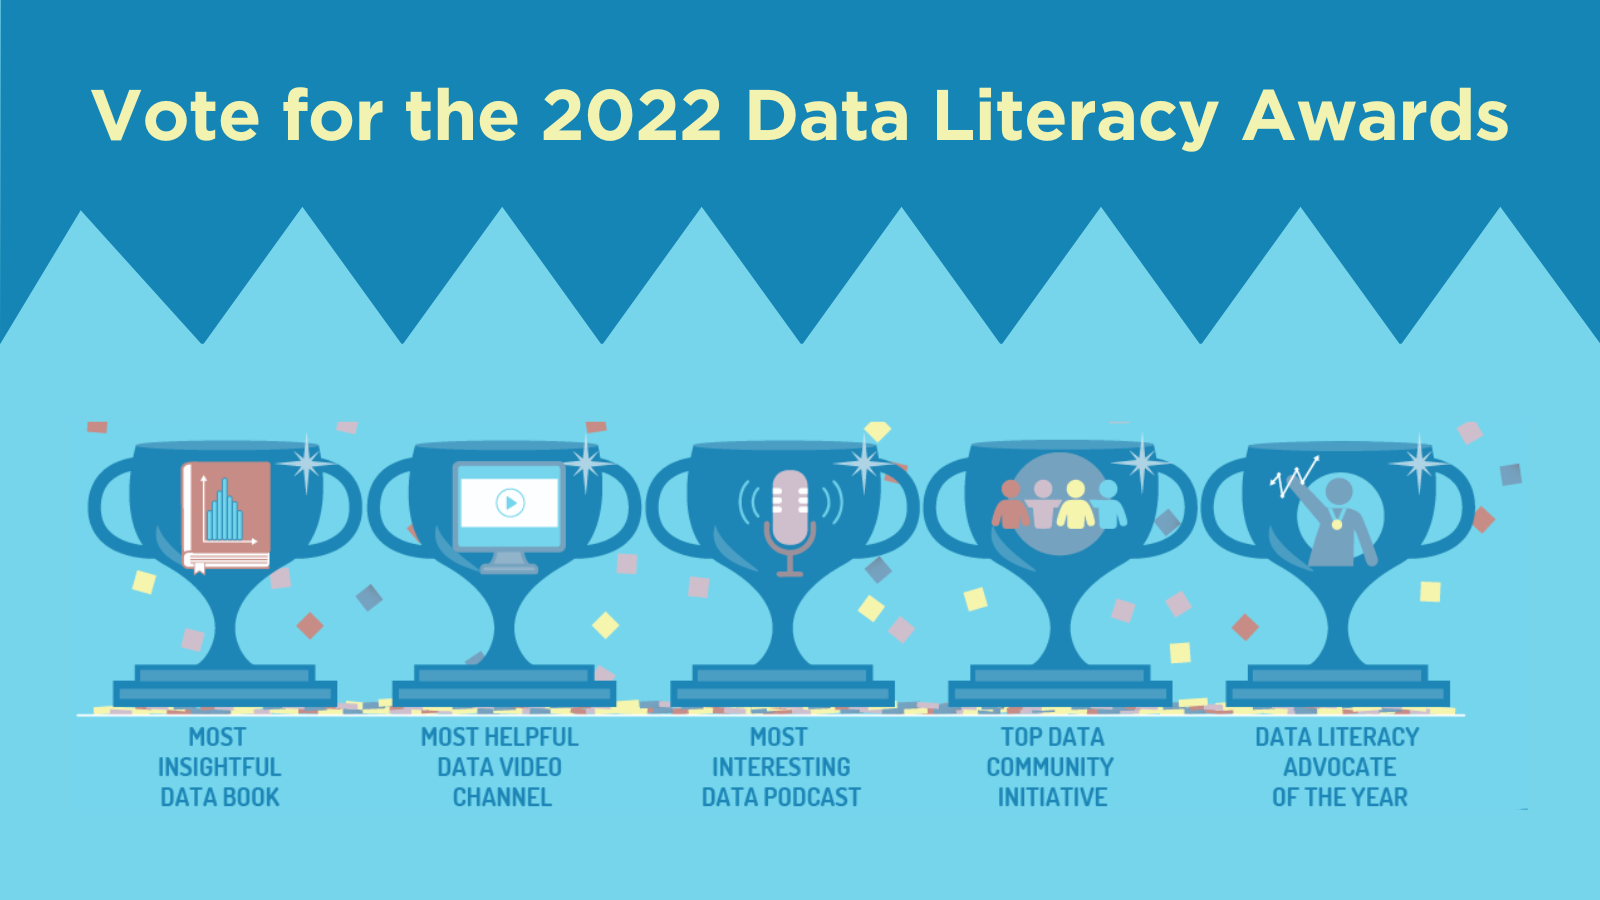 Image that says vote for the 2022 data literacy awards. There's an award for each of the 5 categories, which are Most Insightful Data Book, most helpful video channel, most interesting data podcast, Top Data Community Initiative, and data literacy advocate of the year.